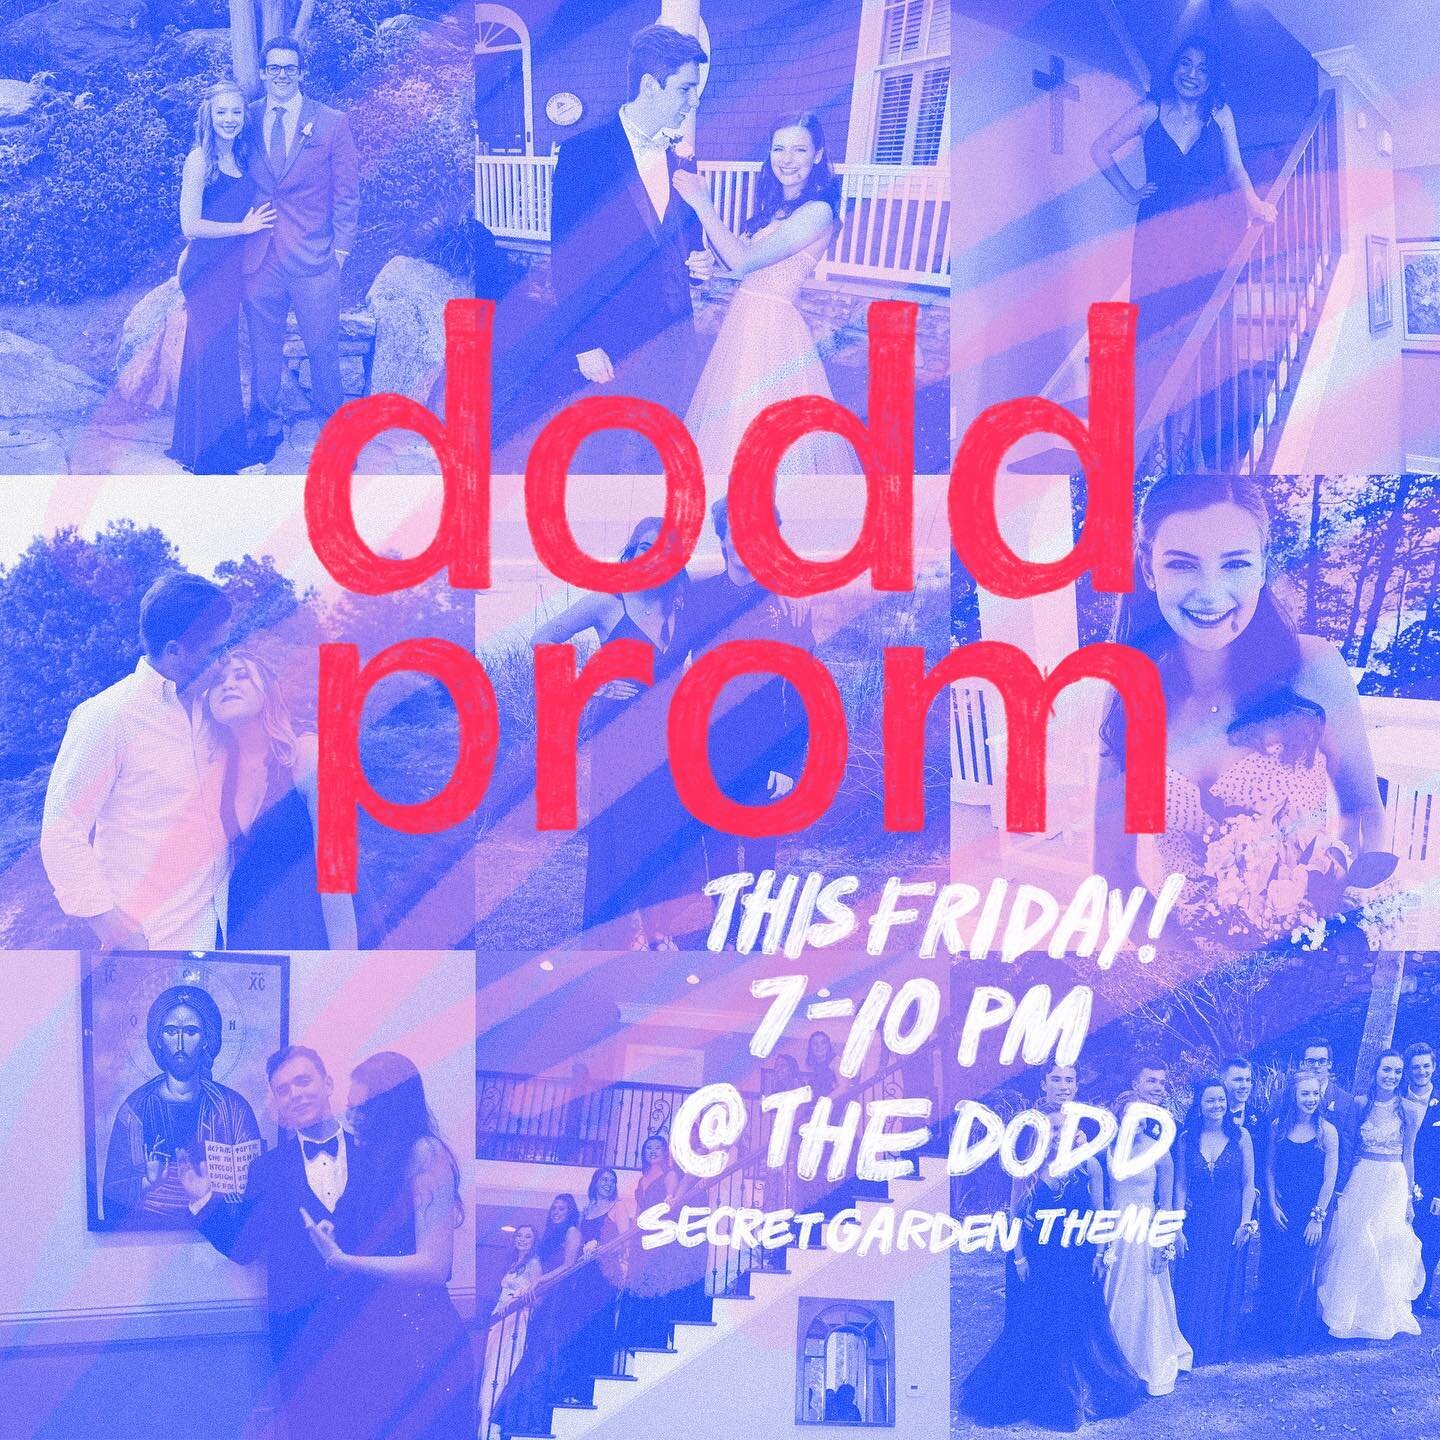 Another reminder about DODD PROM this Friday!!! We are SO excited for this event and cannot wait to dance the night away at the Dodd with all of you 🕺🪩 Check out these old pics of our very own E-Board from high school Prom&hellip;we cannot wait to 